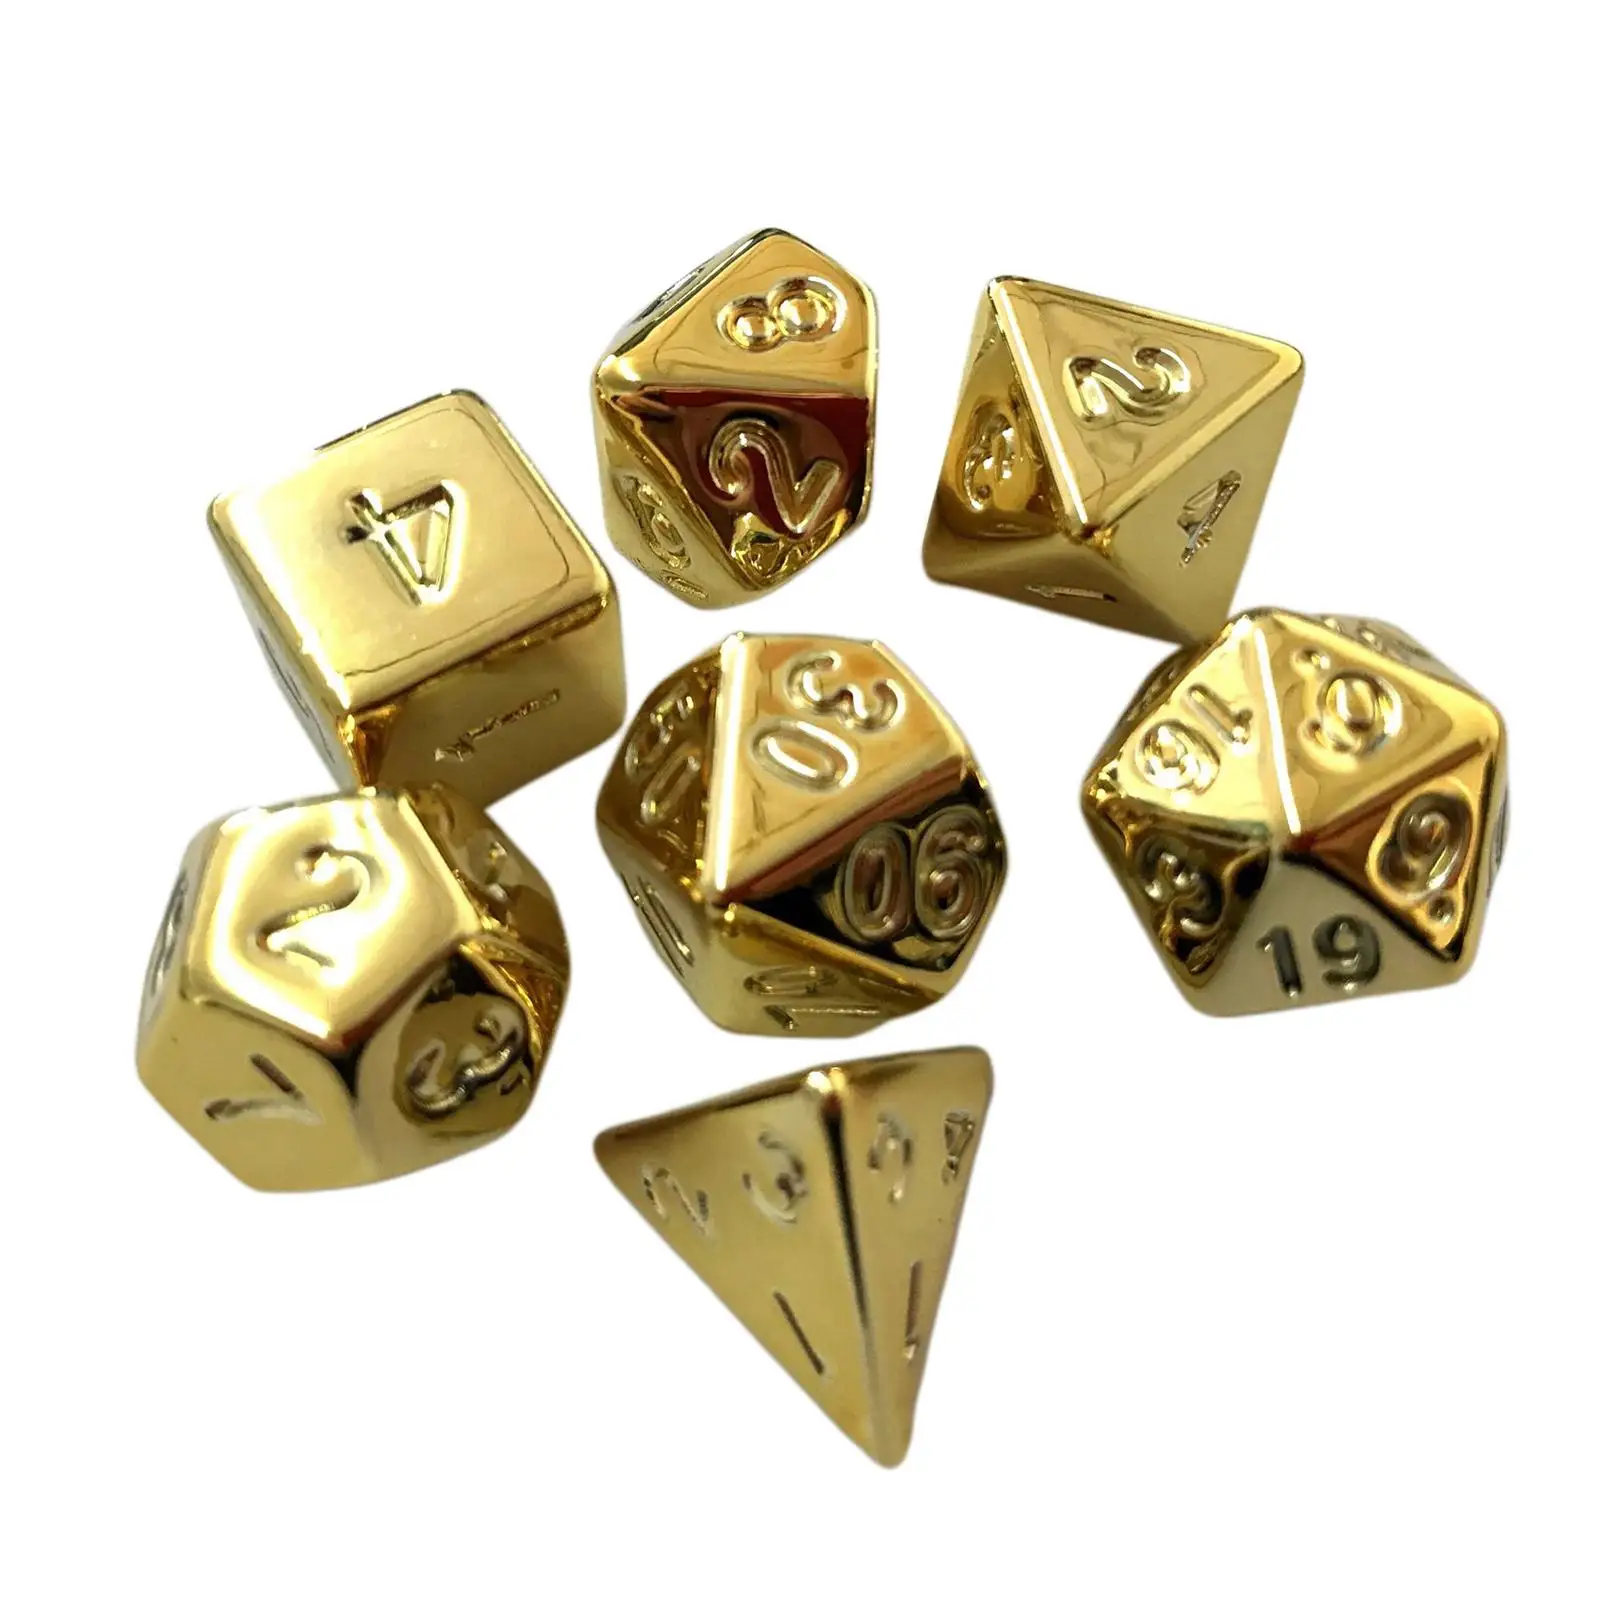 7x Acrylic Polyhedral Dices D4-D20 Multi Sided Dices Entertainment Toys for RPG TCG Role Playing Table Board Games